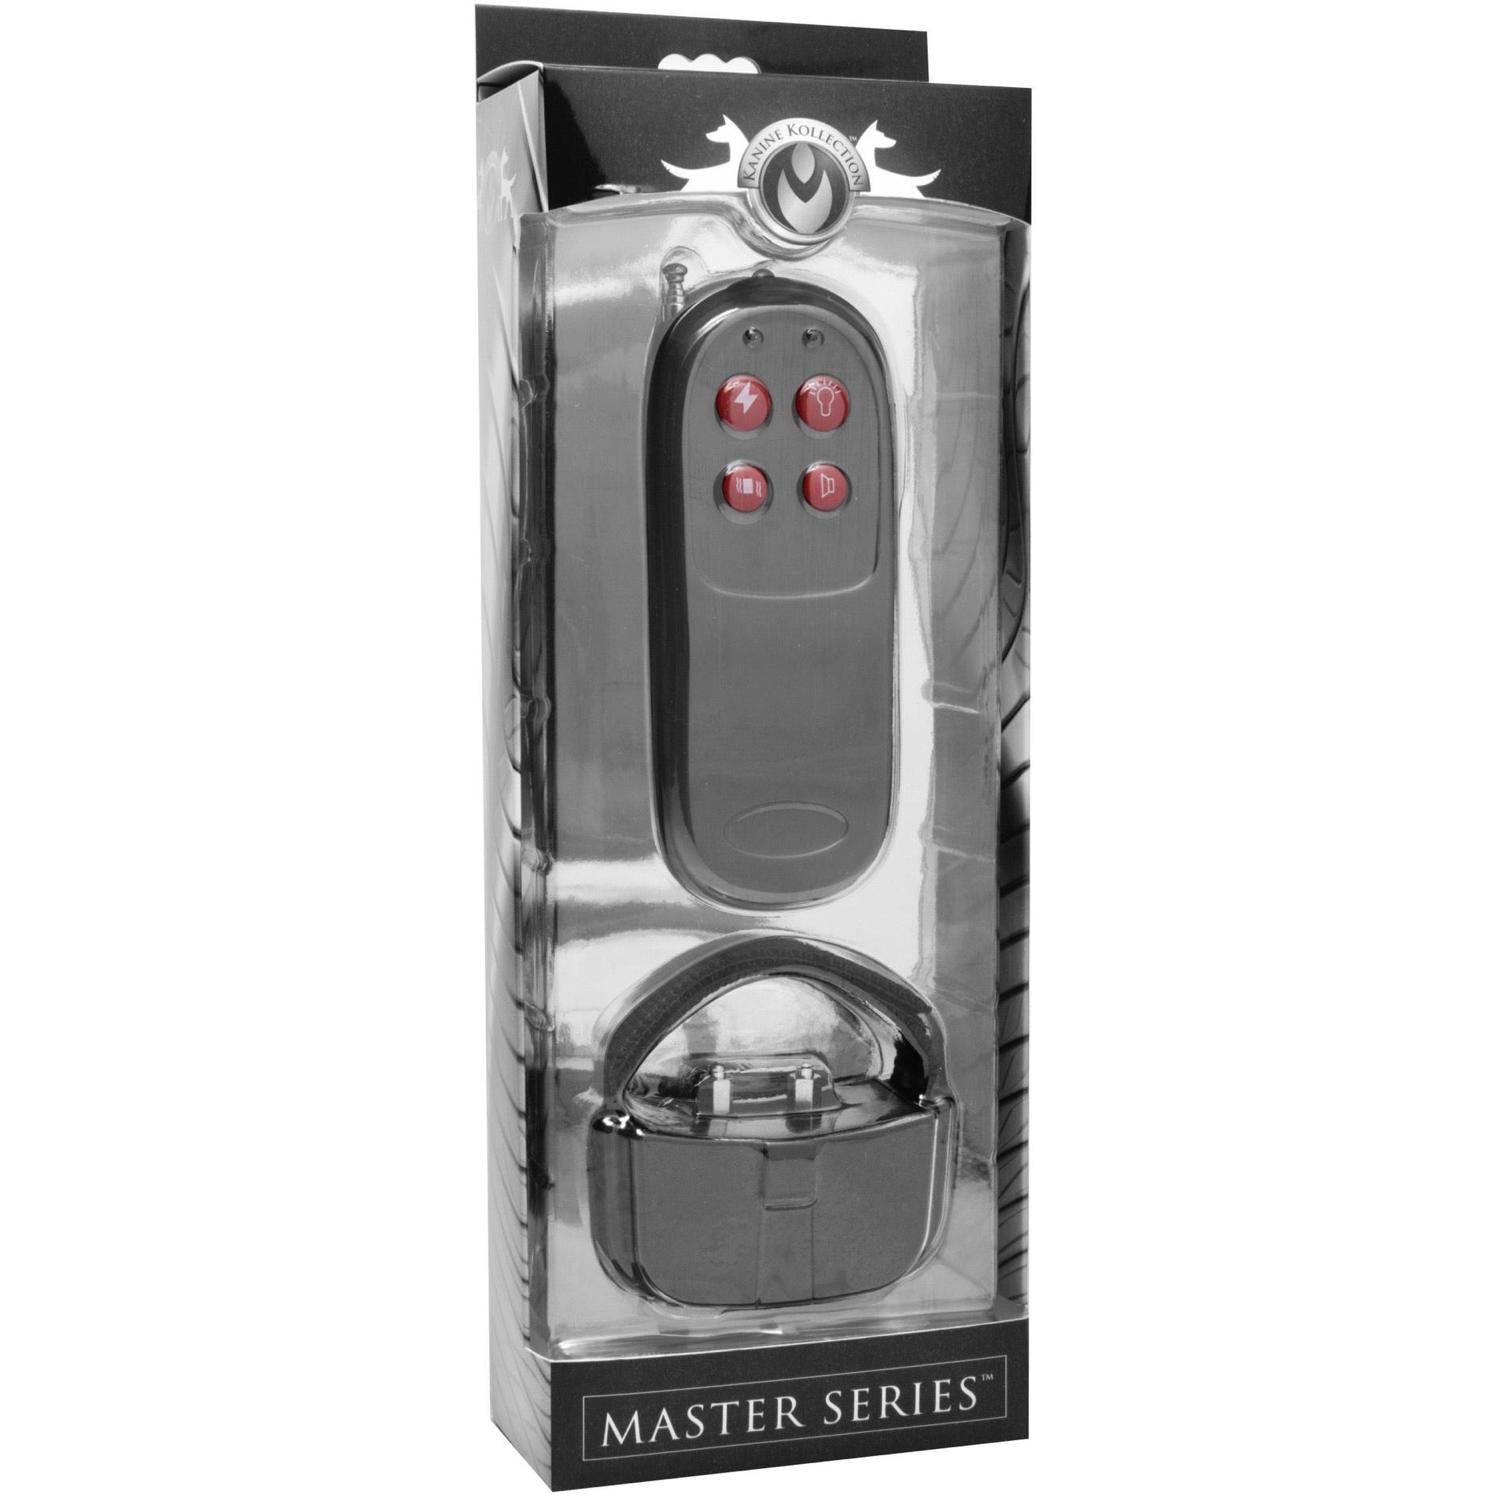 Master Series Cock Shock Remote CBT Electric Cock Ring - Extreme Toyz Singapore - https://extremetoyz.com.sg - Sex Toys and Lingerie Online Store